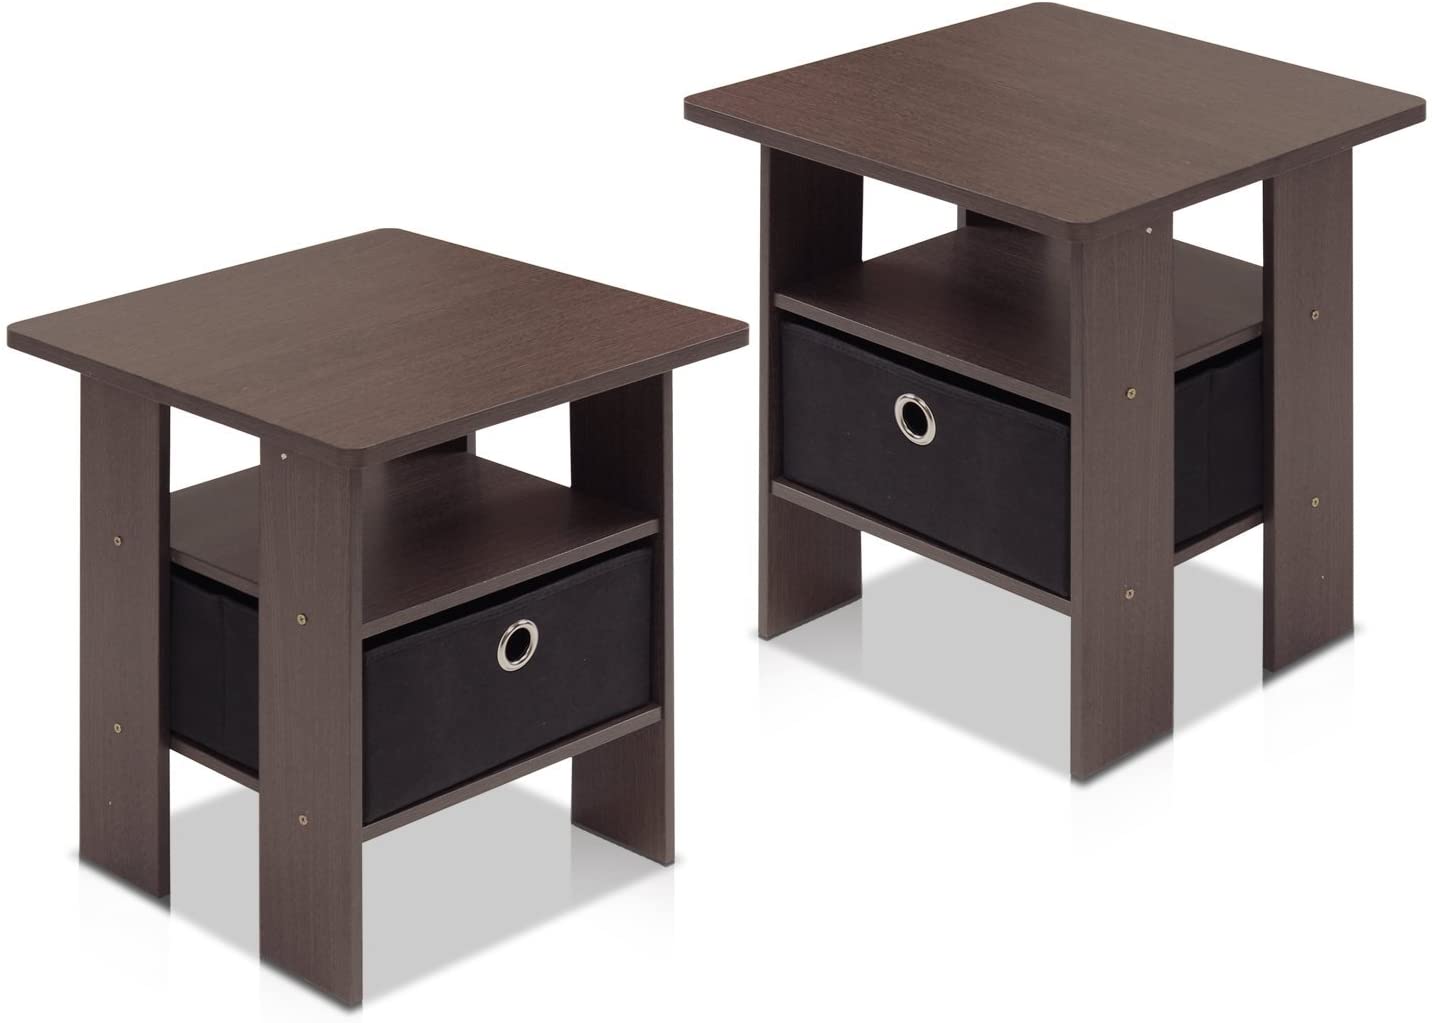 Side Tables : End Table Bedroom Night Stand, Petite, Dark Brown, Set of 2